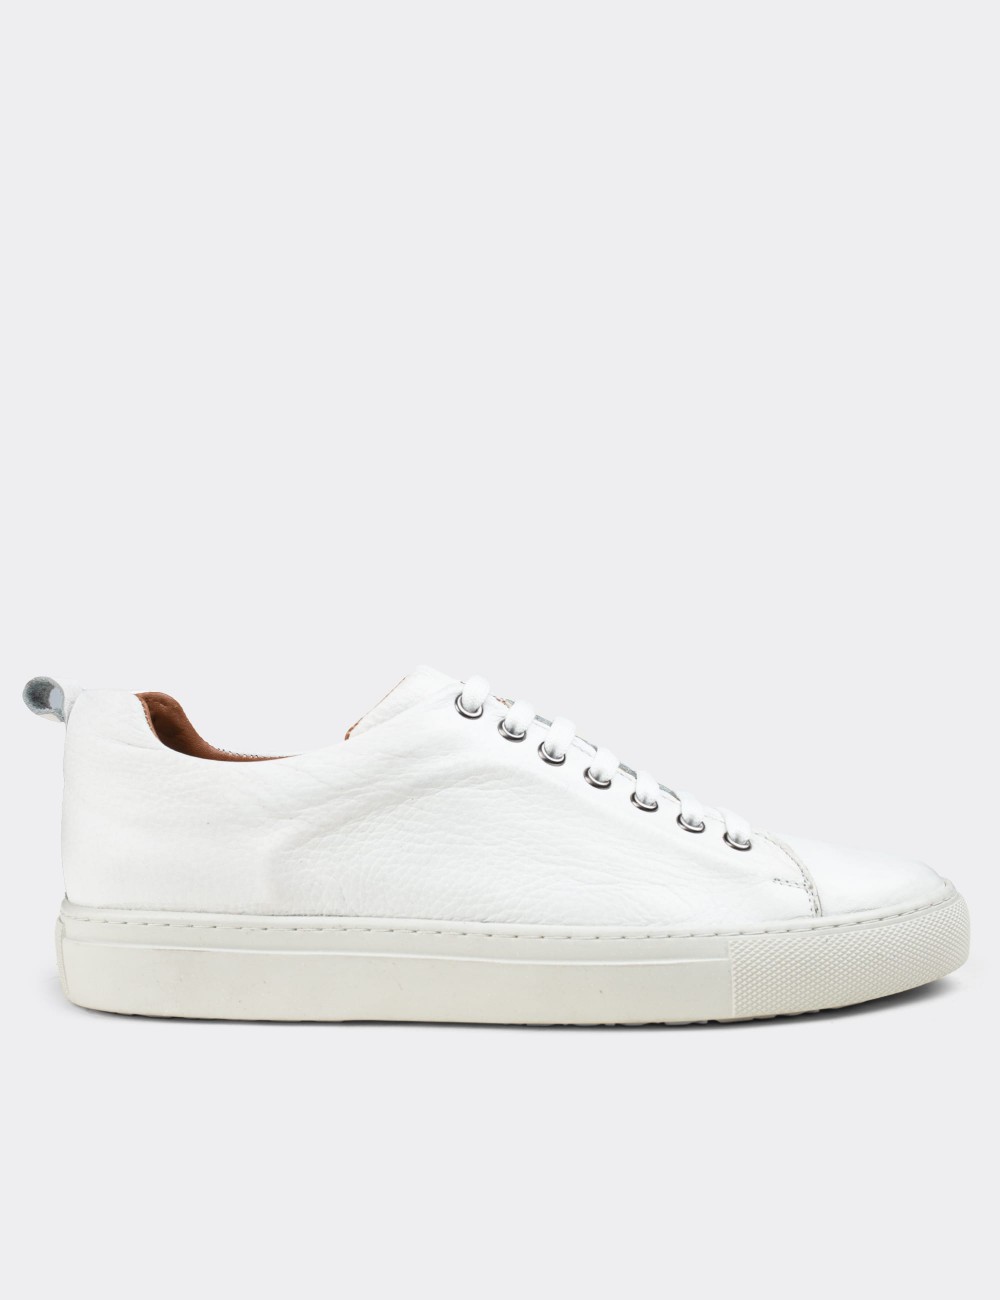 White  Leather Sneakers - 01669MBYZC02